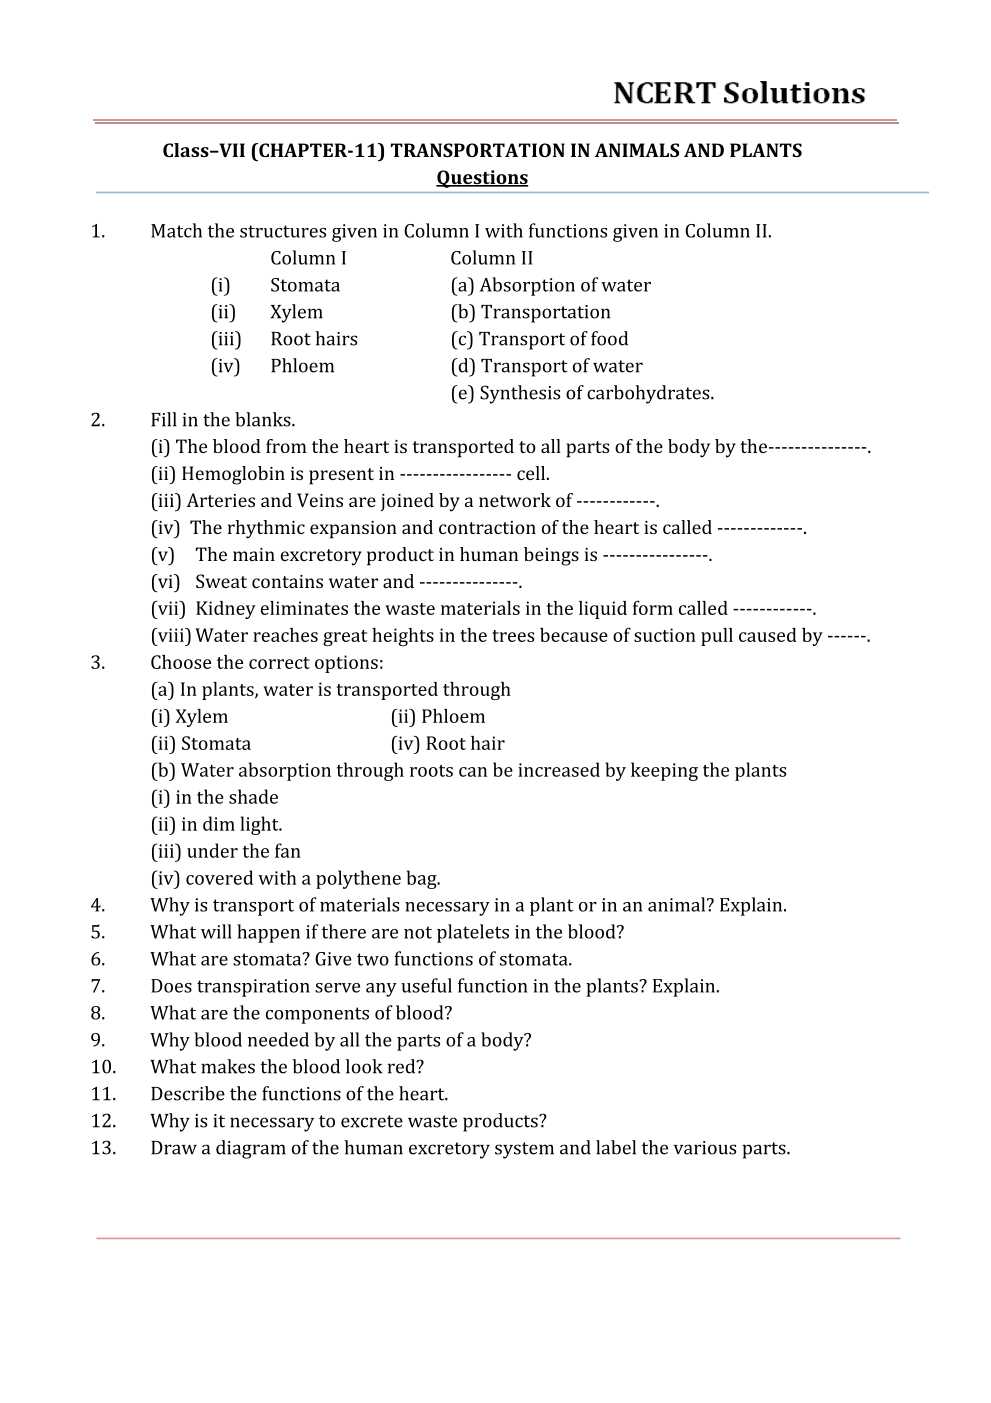 NCERT Solutions for Class 7 Science Chapter 11 Transportation in Animals  and Plants - Free PDF